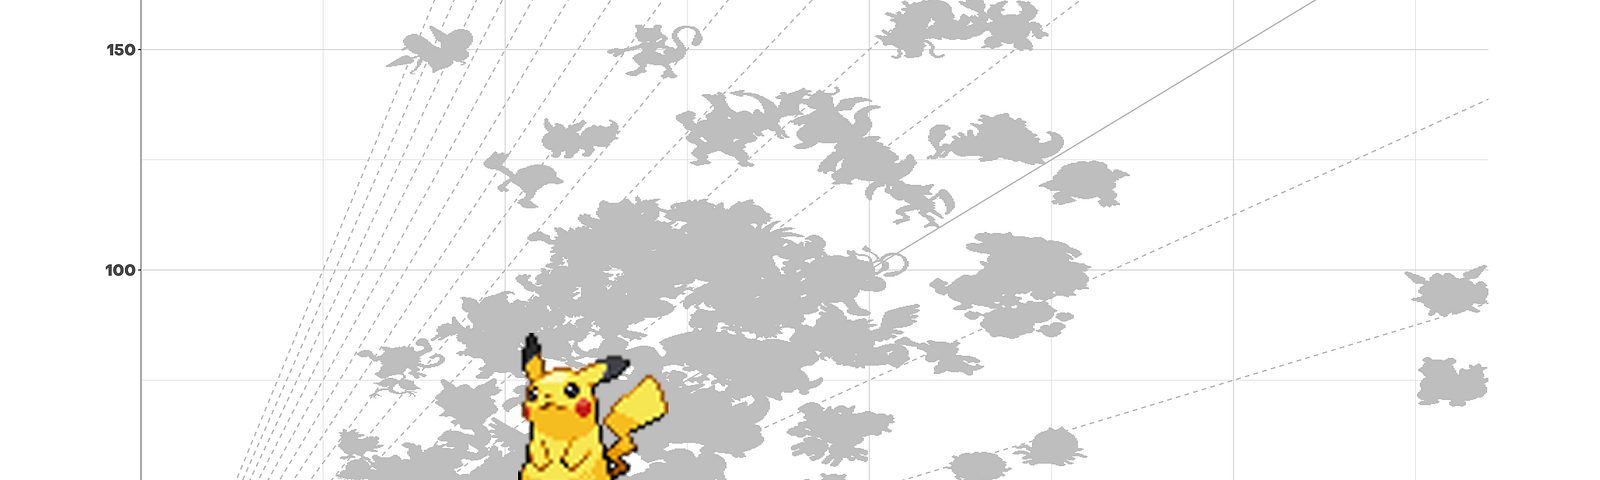 Blog post preview image, a Pikachu on a scatter plot